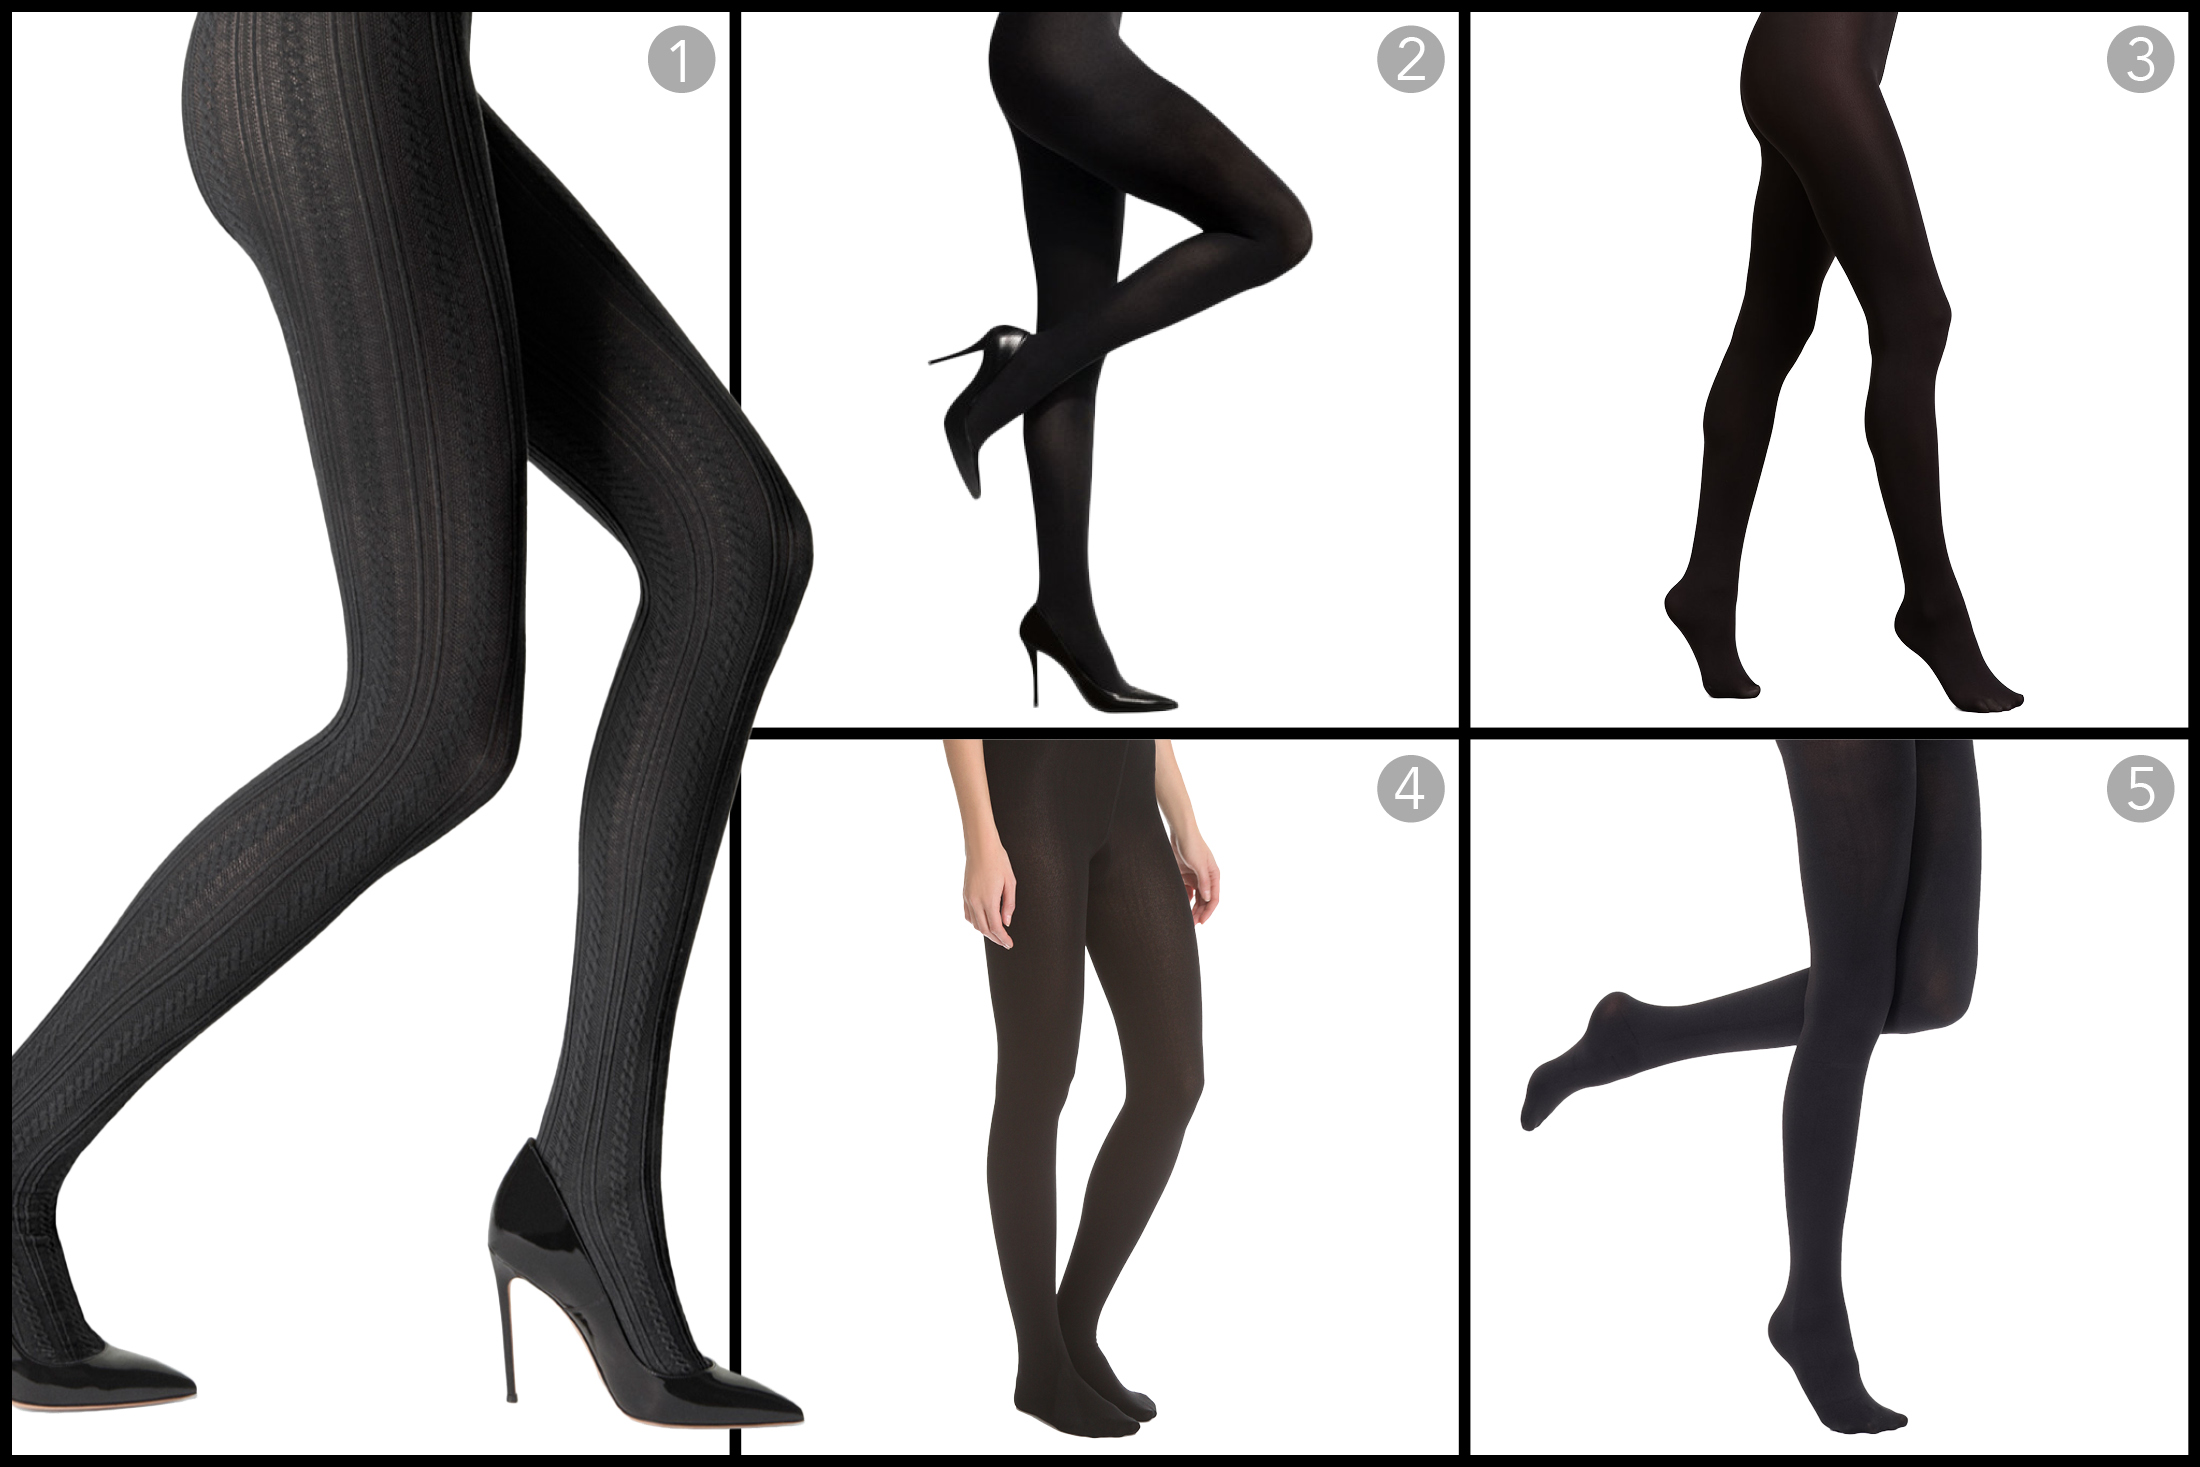 How to Wear Tights: Buying Guide - Bloomberg